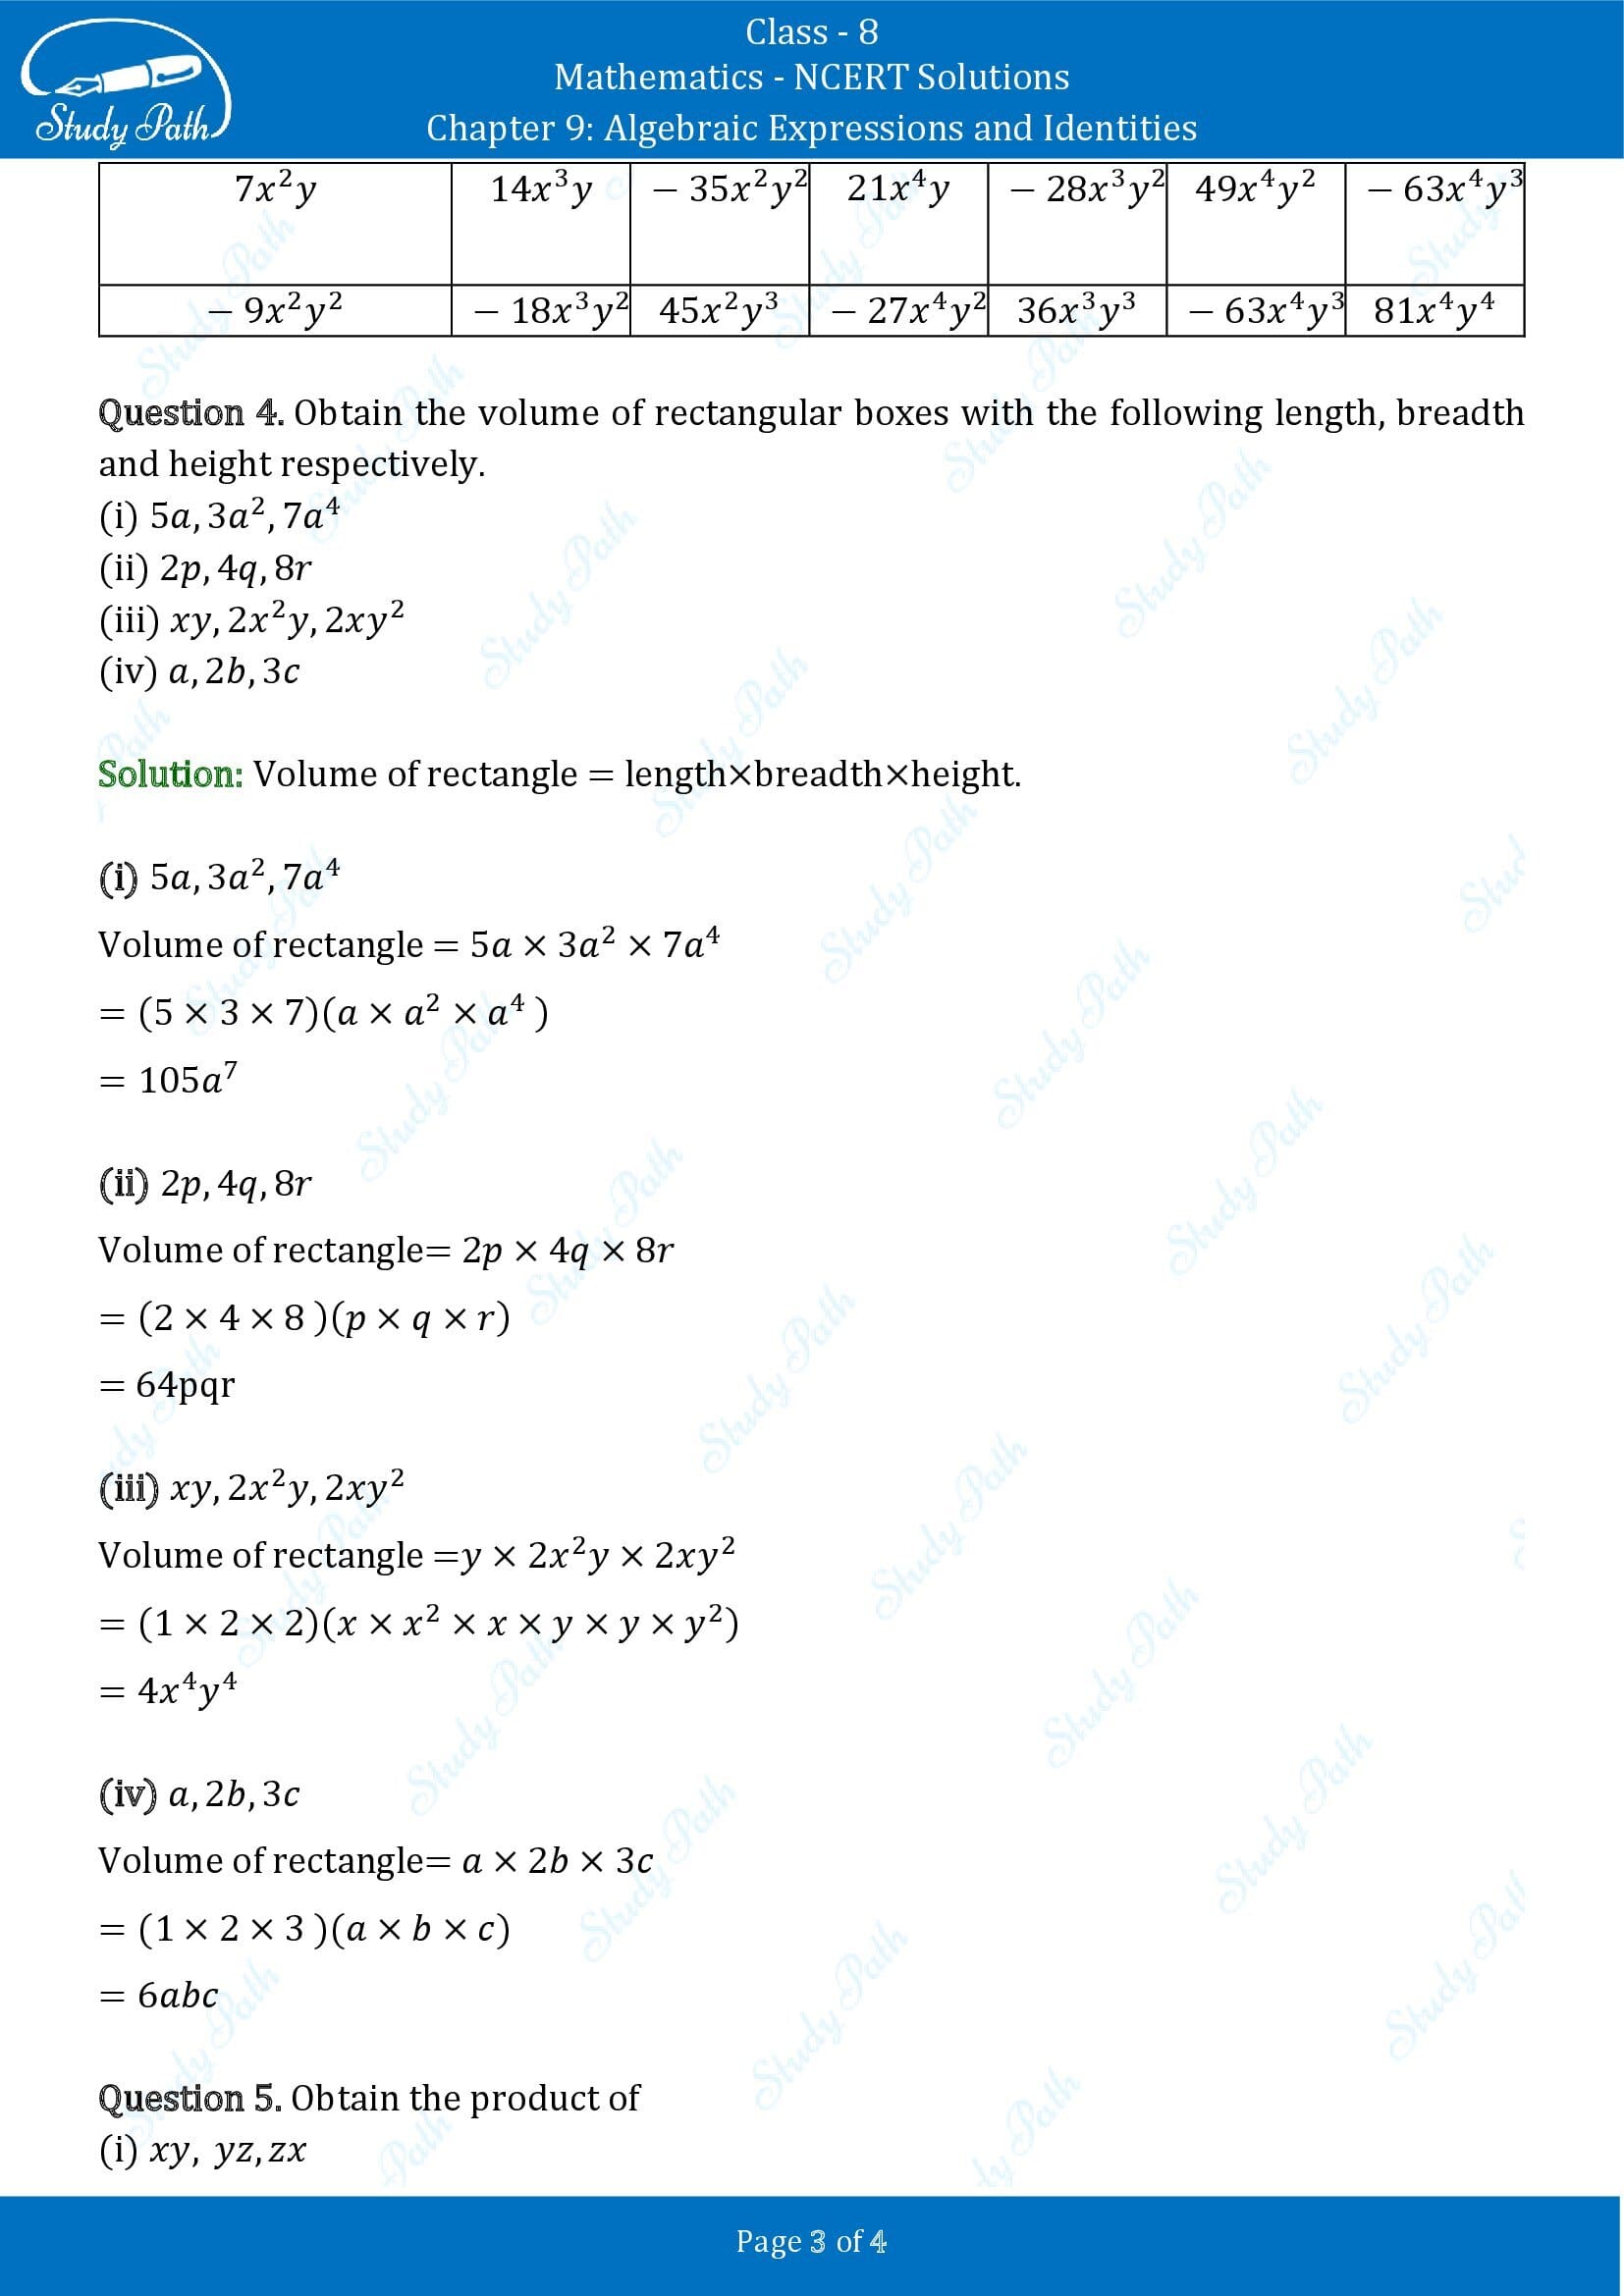 NCERT Solutions for Class 8 Maths Chapter 9 Algebraic Expressions and Identities Exercise 9.2 00003